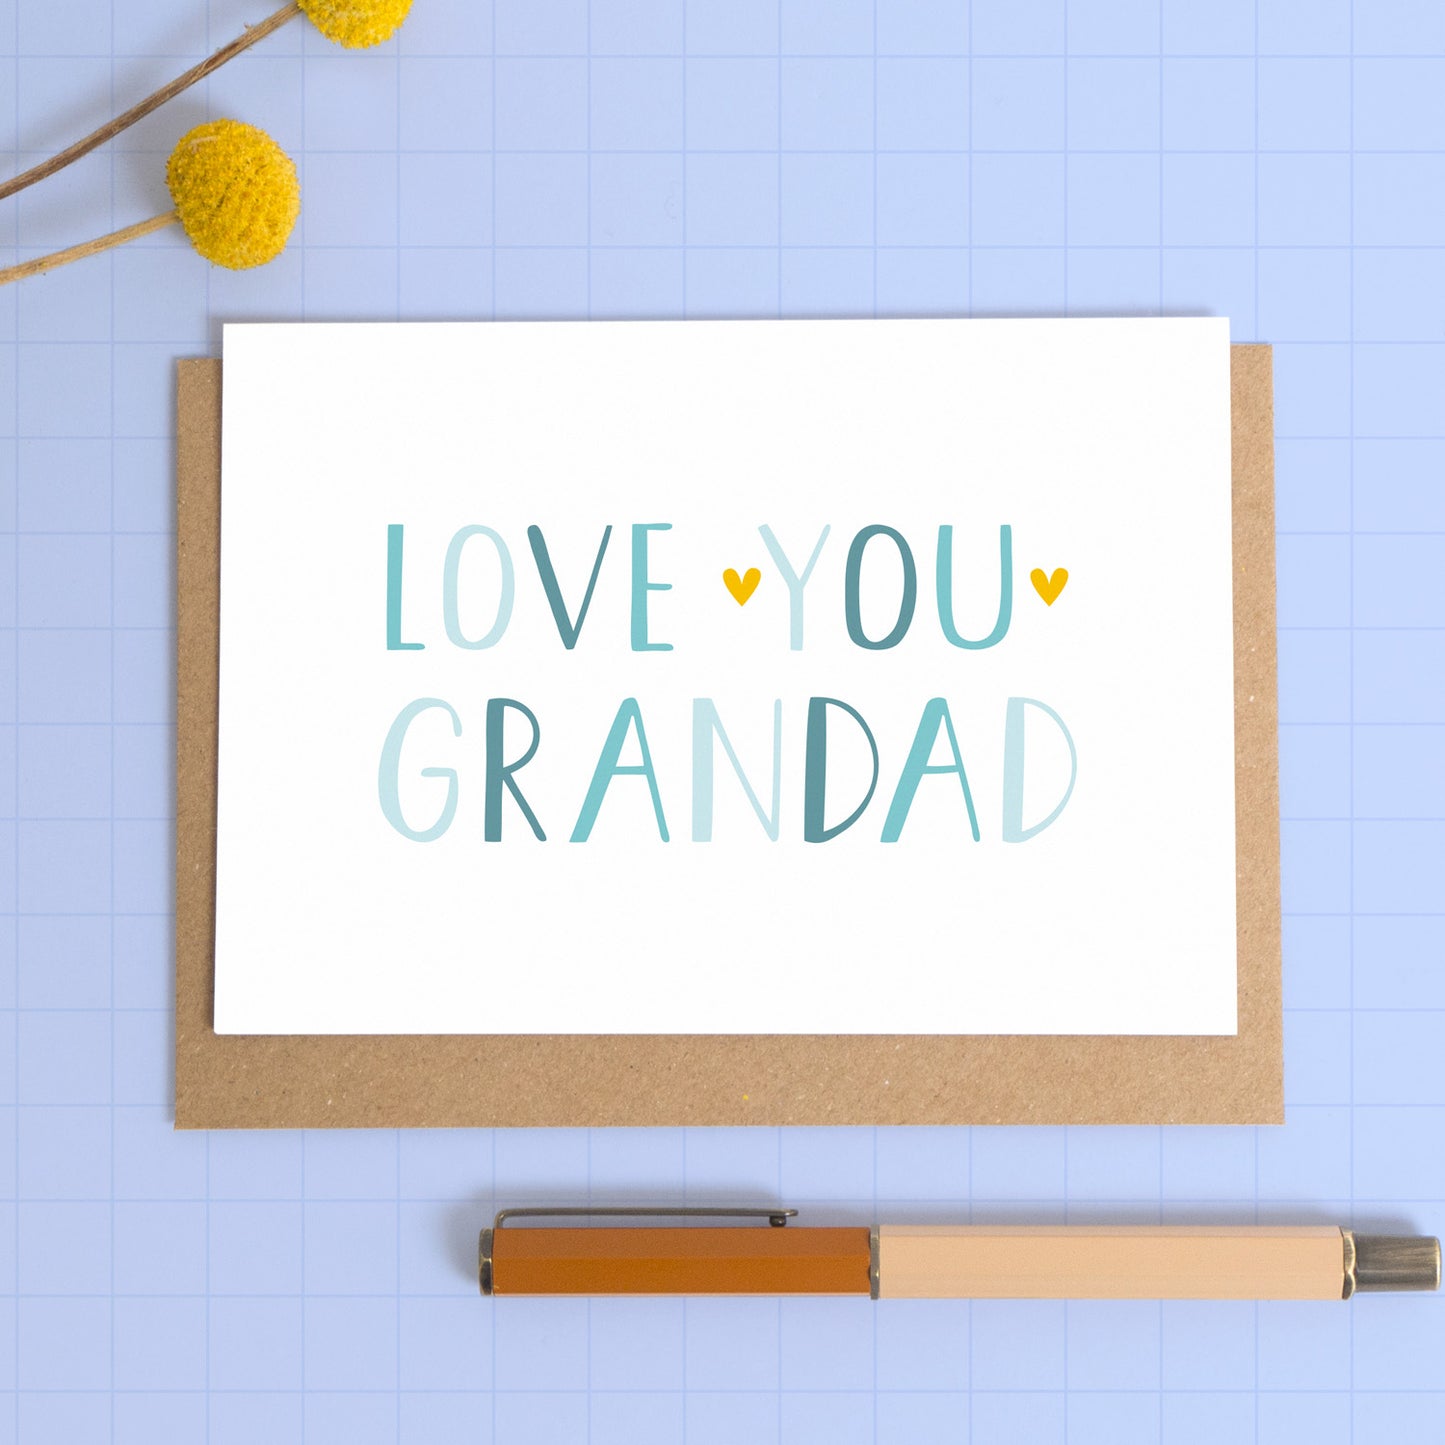 This image shows a love you grandad card in landscape format photographed on a kraft brown envelope with a blue background.